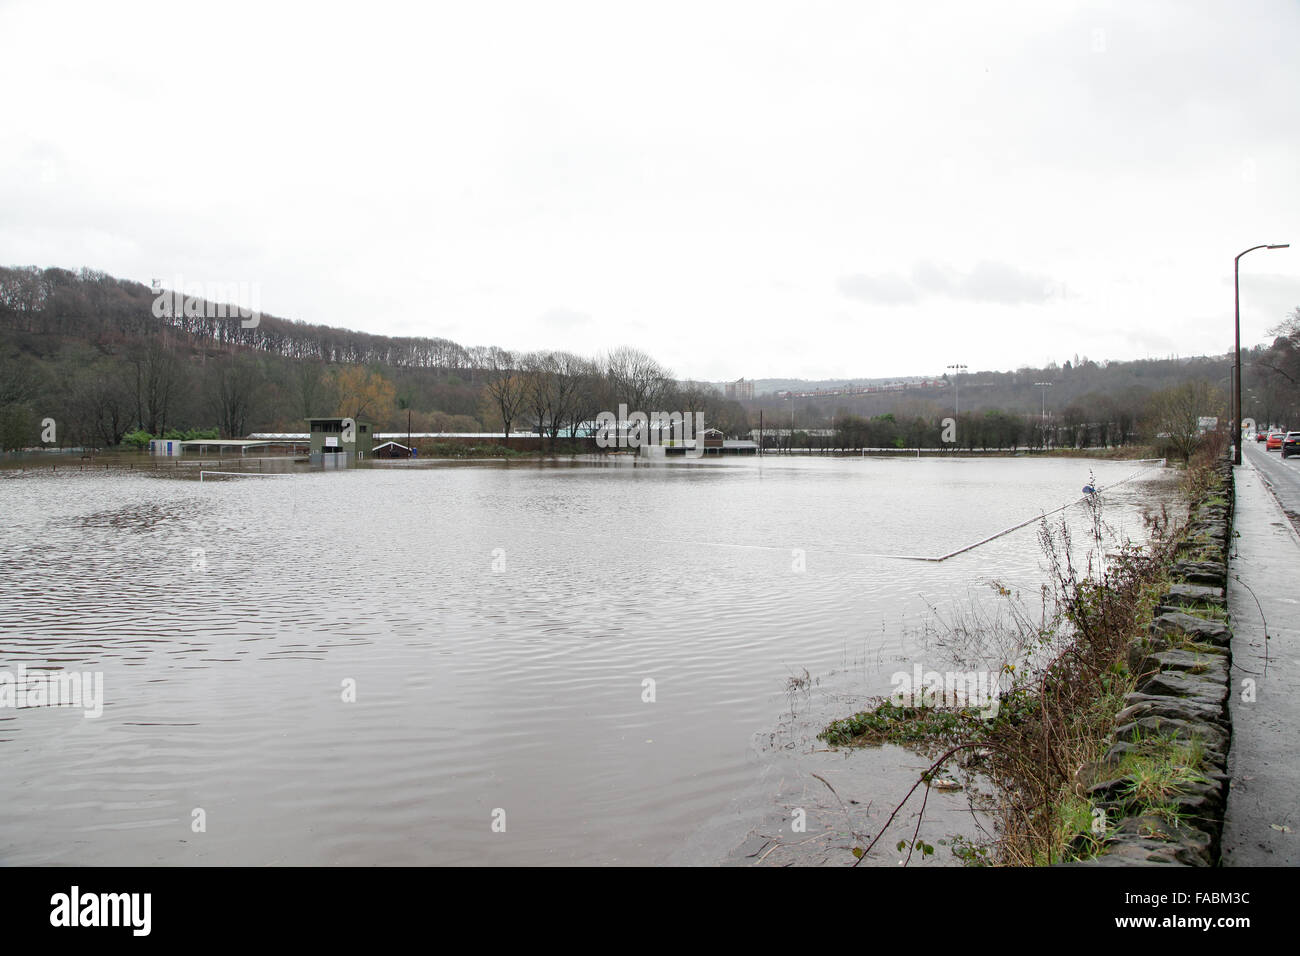 Halifax, West Yorkshire, UK. 26th December, 2015. Heath RUFC in Greetland, Halifax has been flooded once again after heavy rain hits the region and causes more disruptions. Sea containers are floating around as the river Calder overflowed onto their pitch, the adjoining football pitch and the Model car racing track. Credit:  Mick Flynn/Alamy Live News Stock Photo